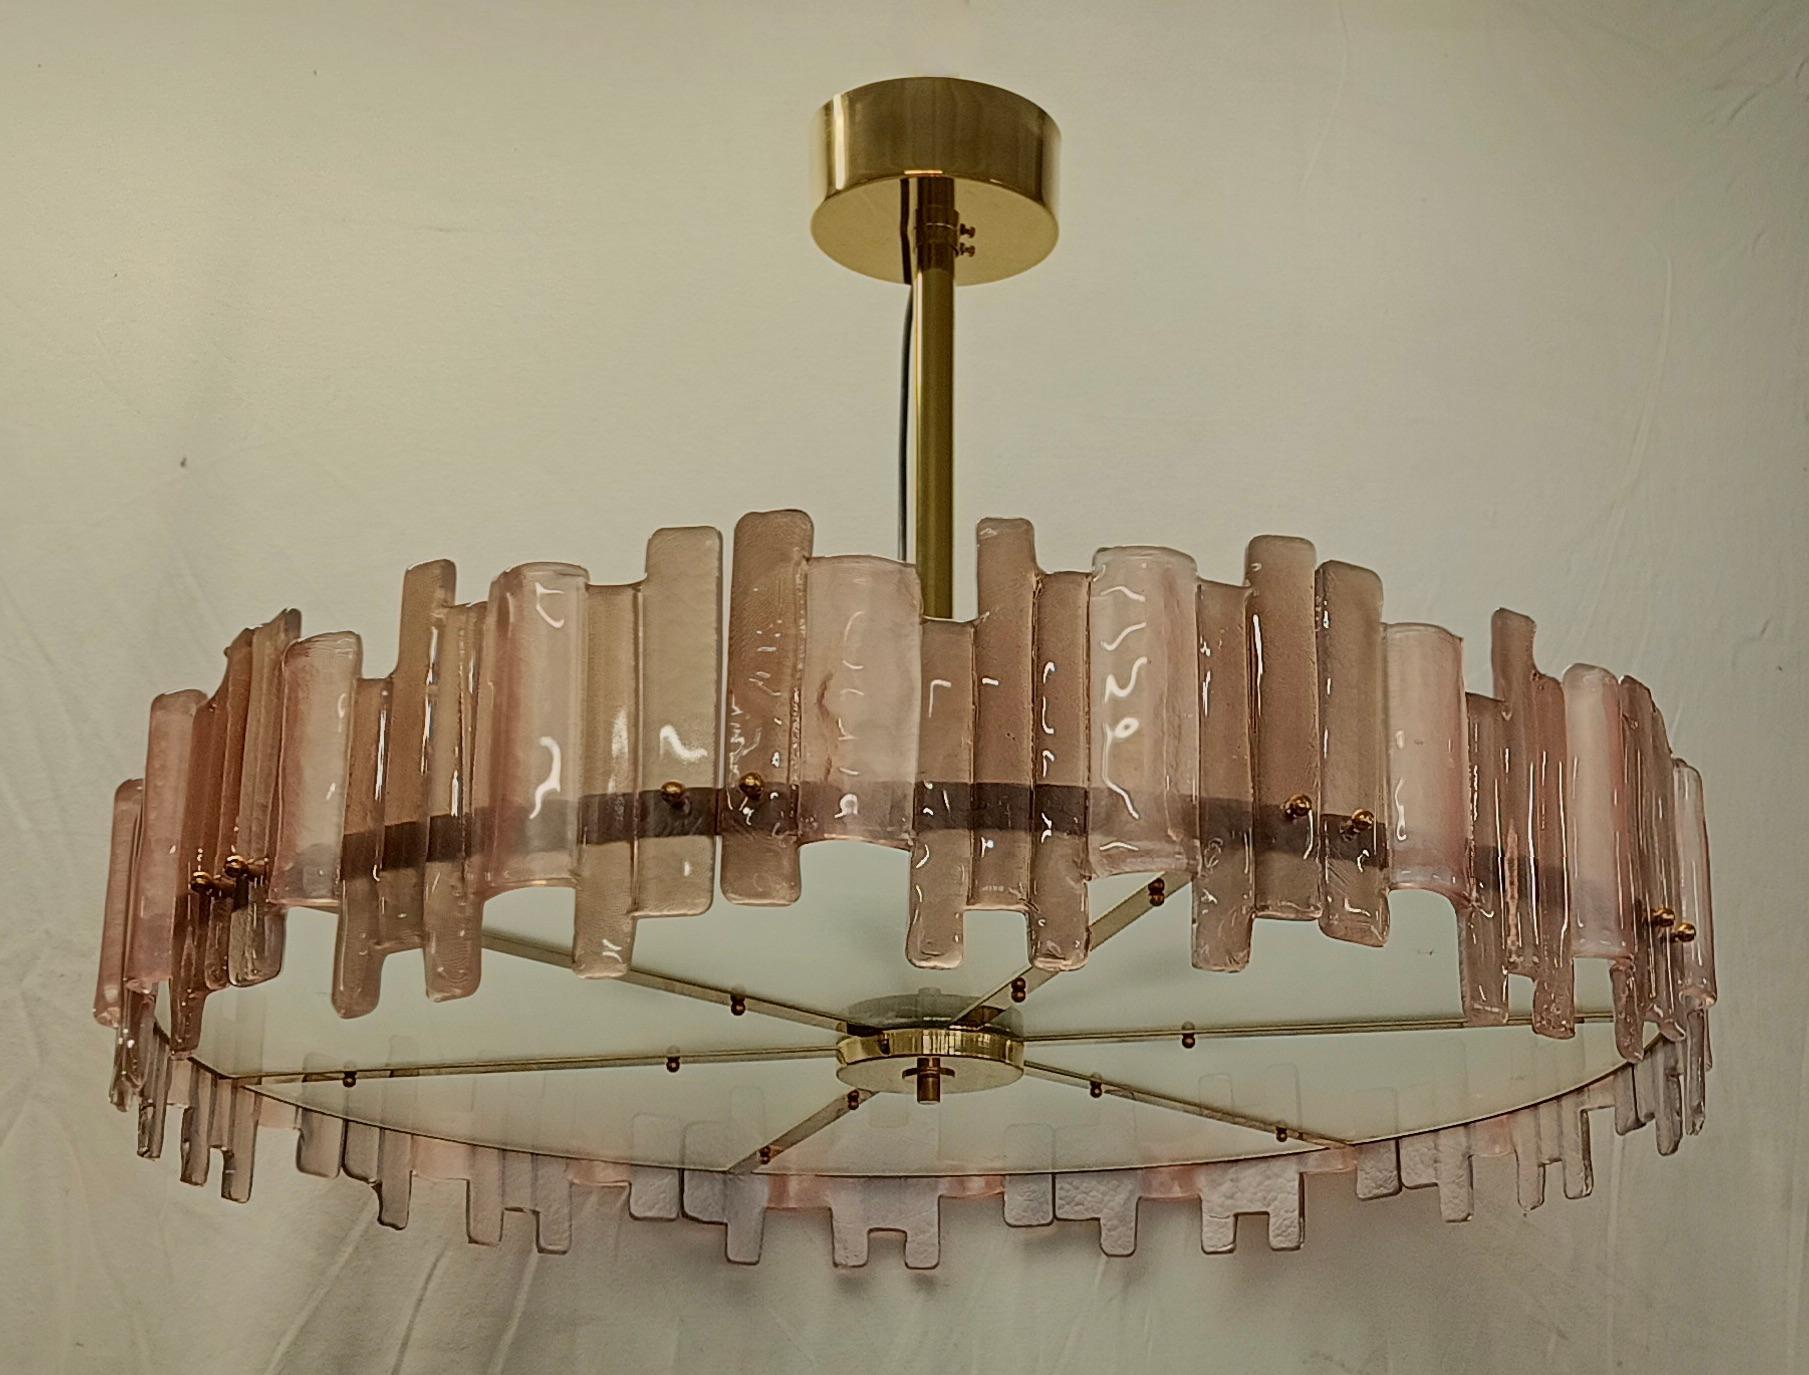 Fantastic round chandelier in Murano glass and polished brass. Note the shape of the Murano pink glass plates, very beautiful and particular. Linear simple but very elegant Murano chandelier.

Murano chandelier in art glass and brass. Formed by a